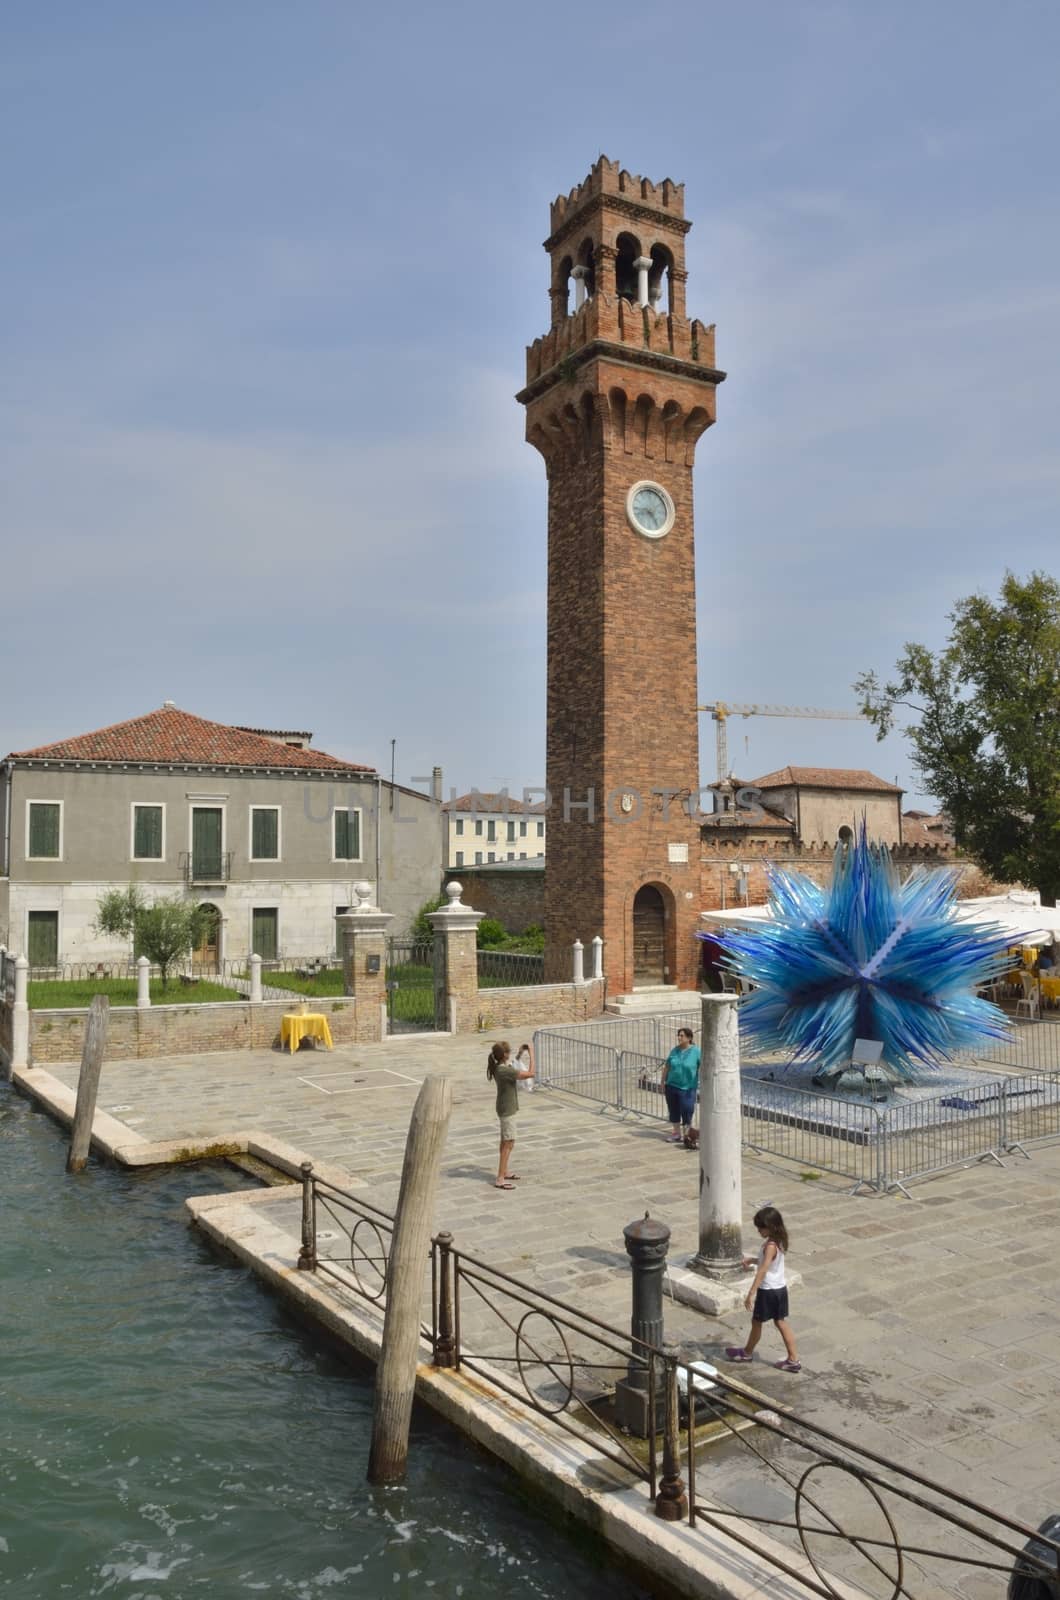 Clock tower and a blue murano glass sculpture by monysasi